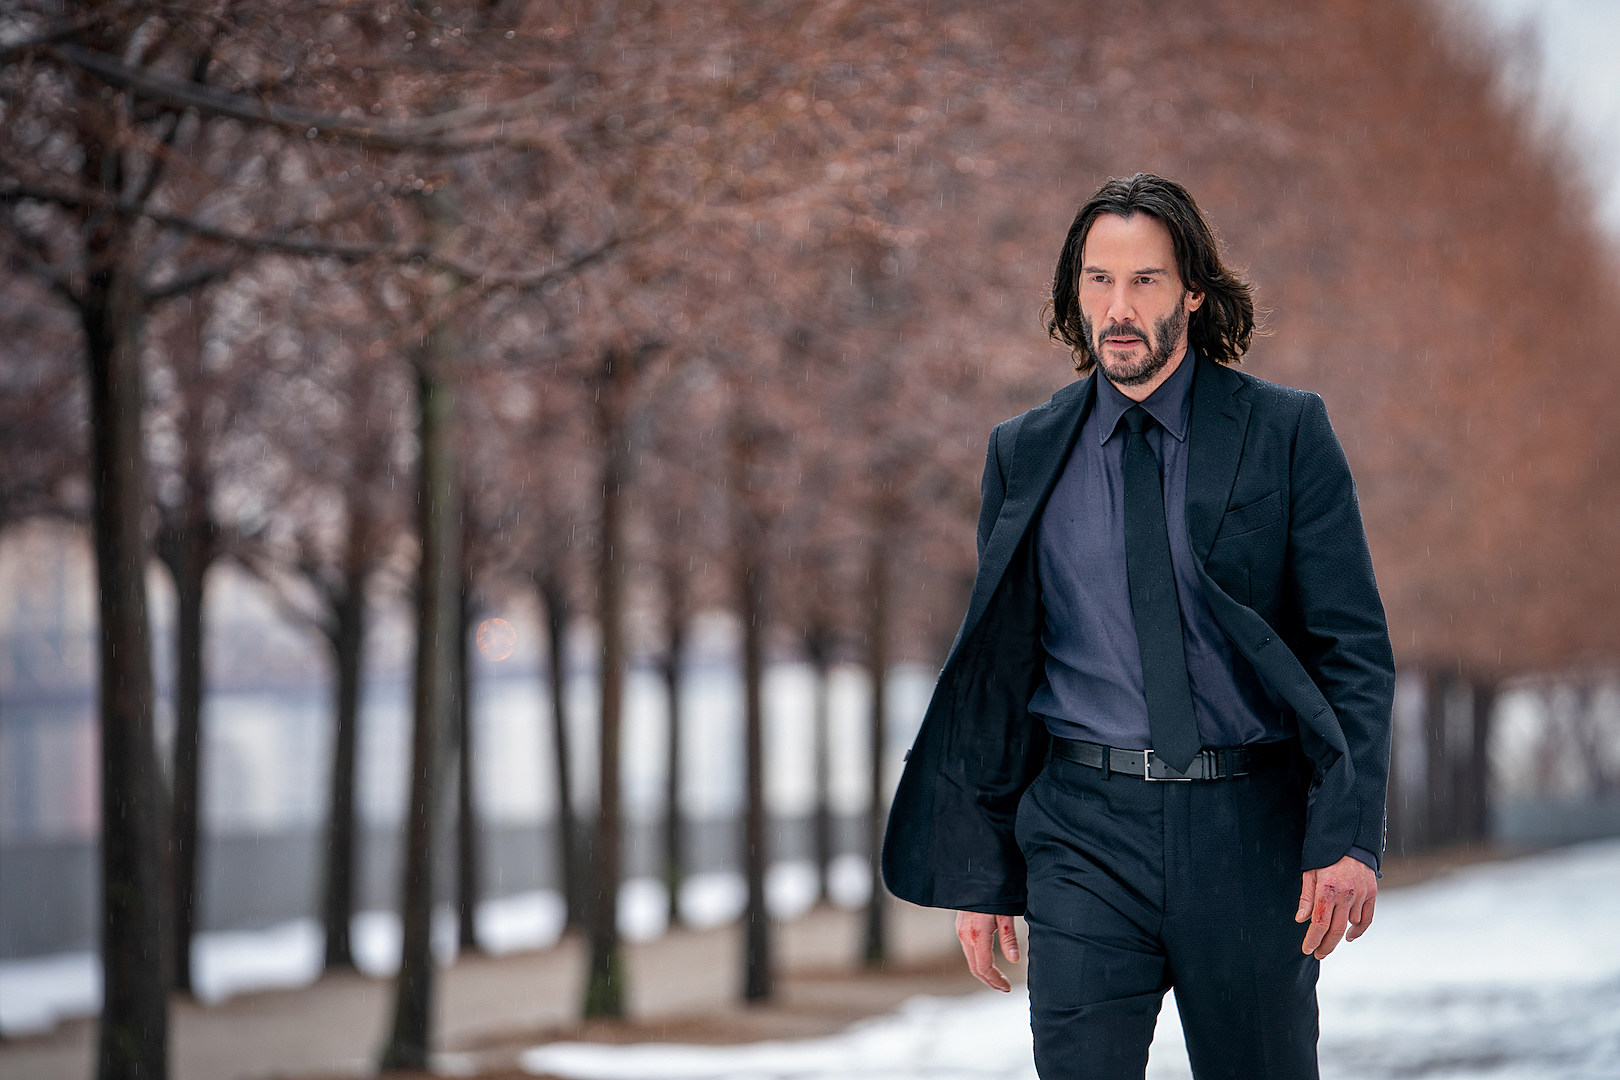 John Wick 4 Review: A Long and Loving Embrace of the Action Genre